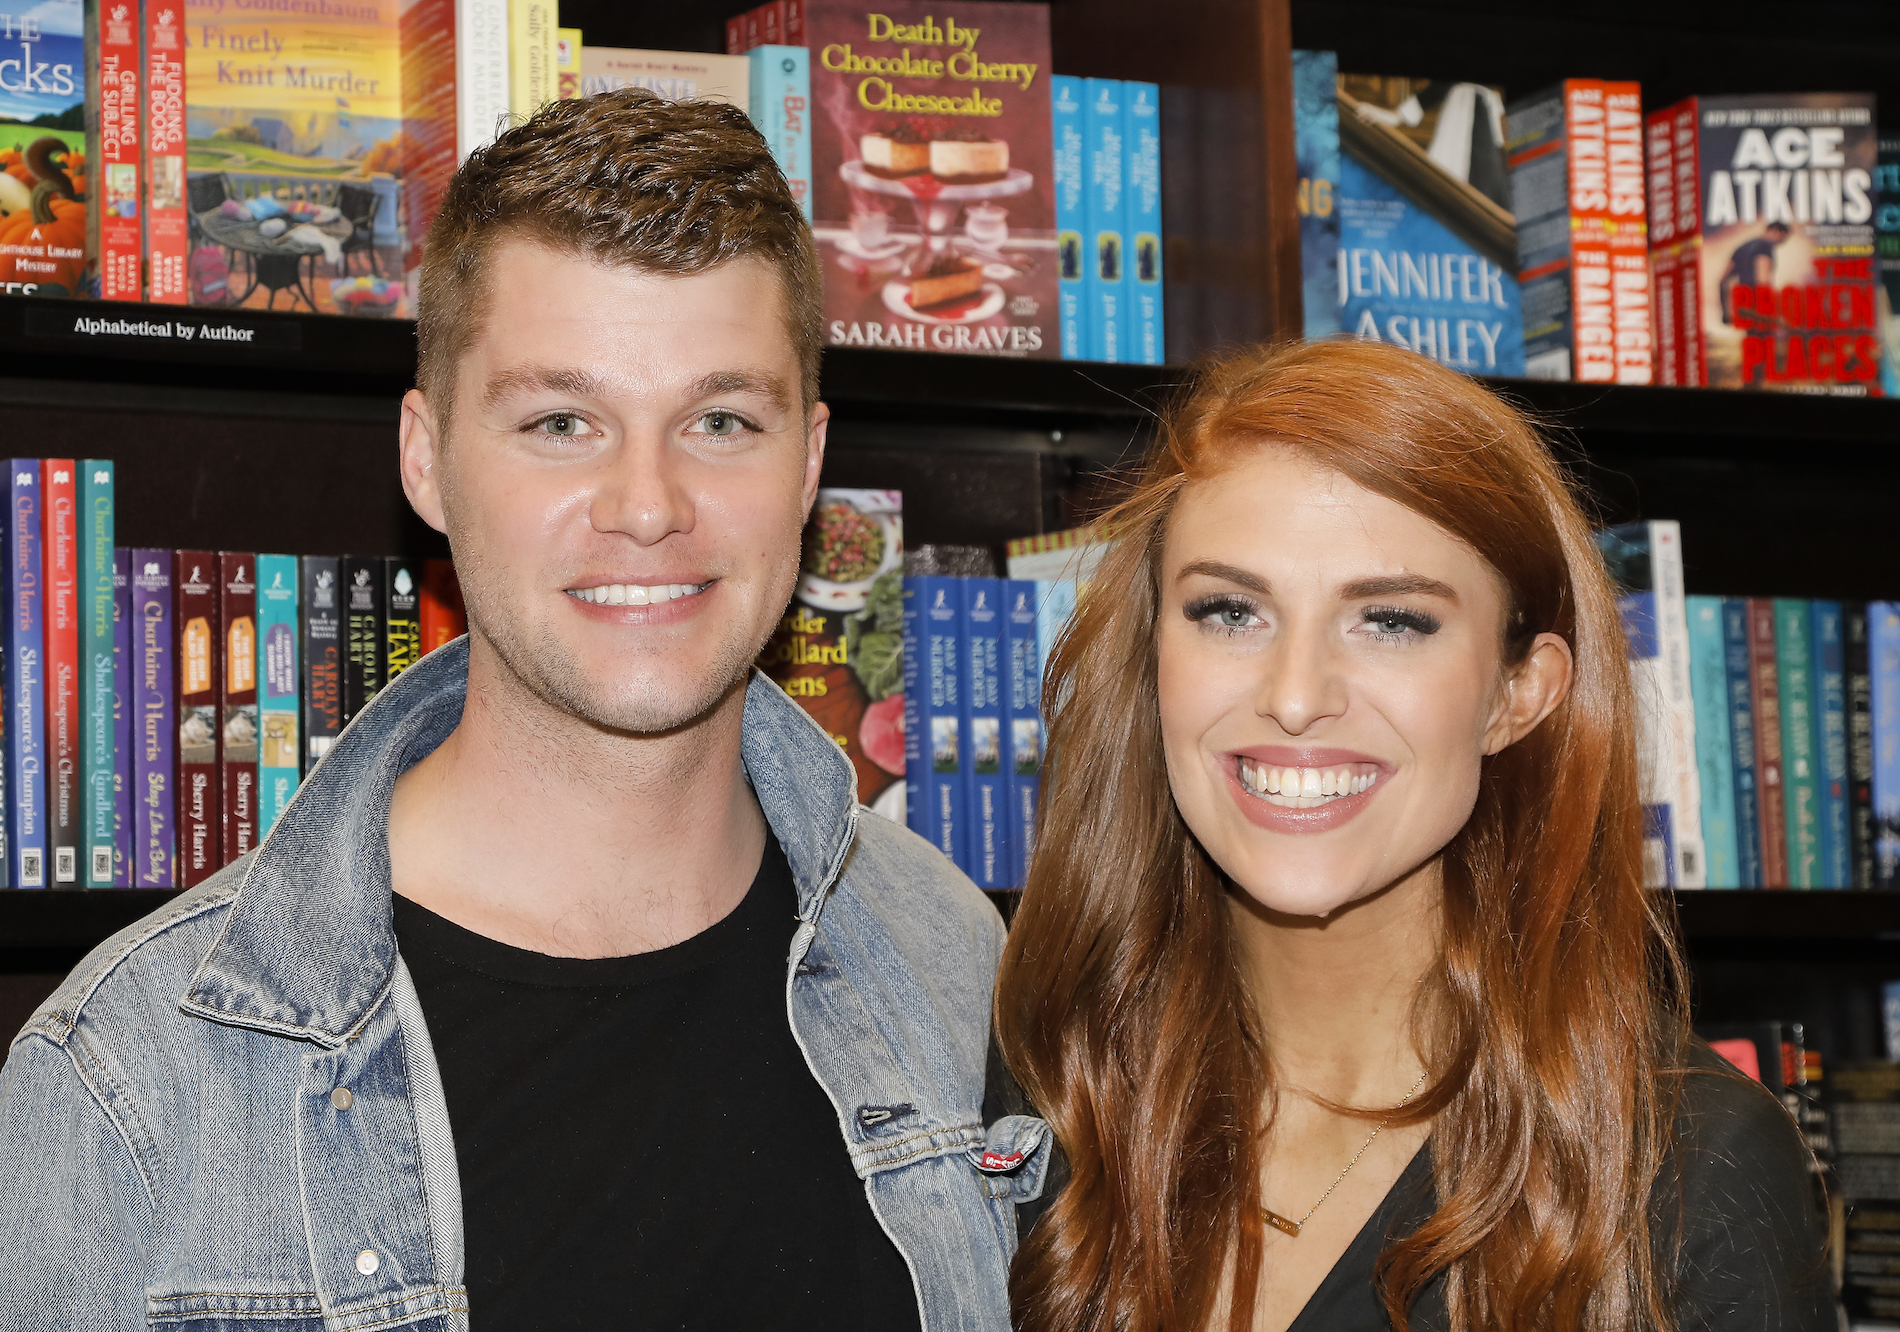 Jeremy and Audrey Roloff from 'Little People, Big World' standing together and smiling as they celebrate their new memoir